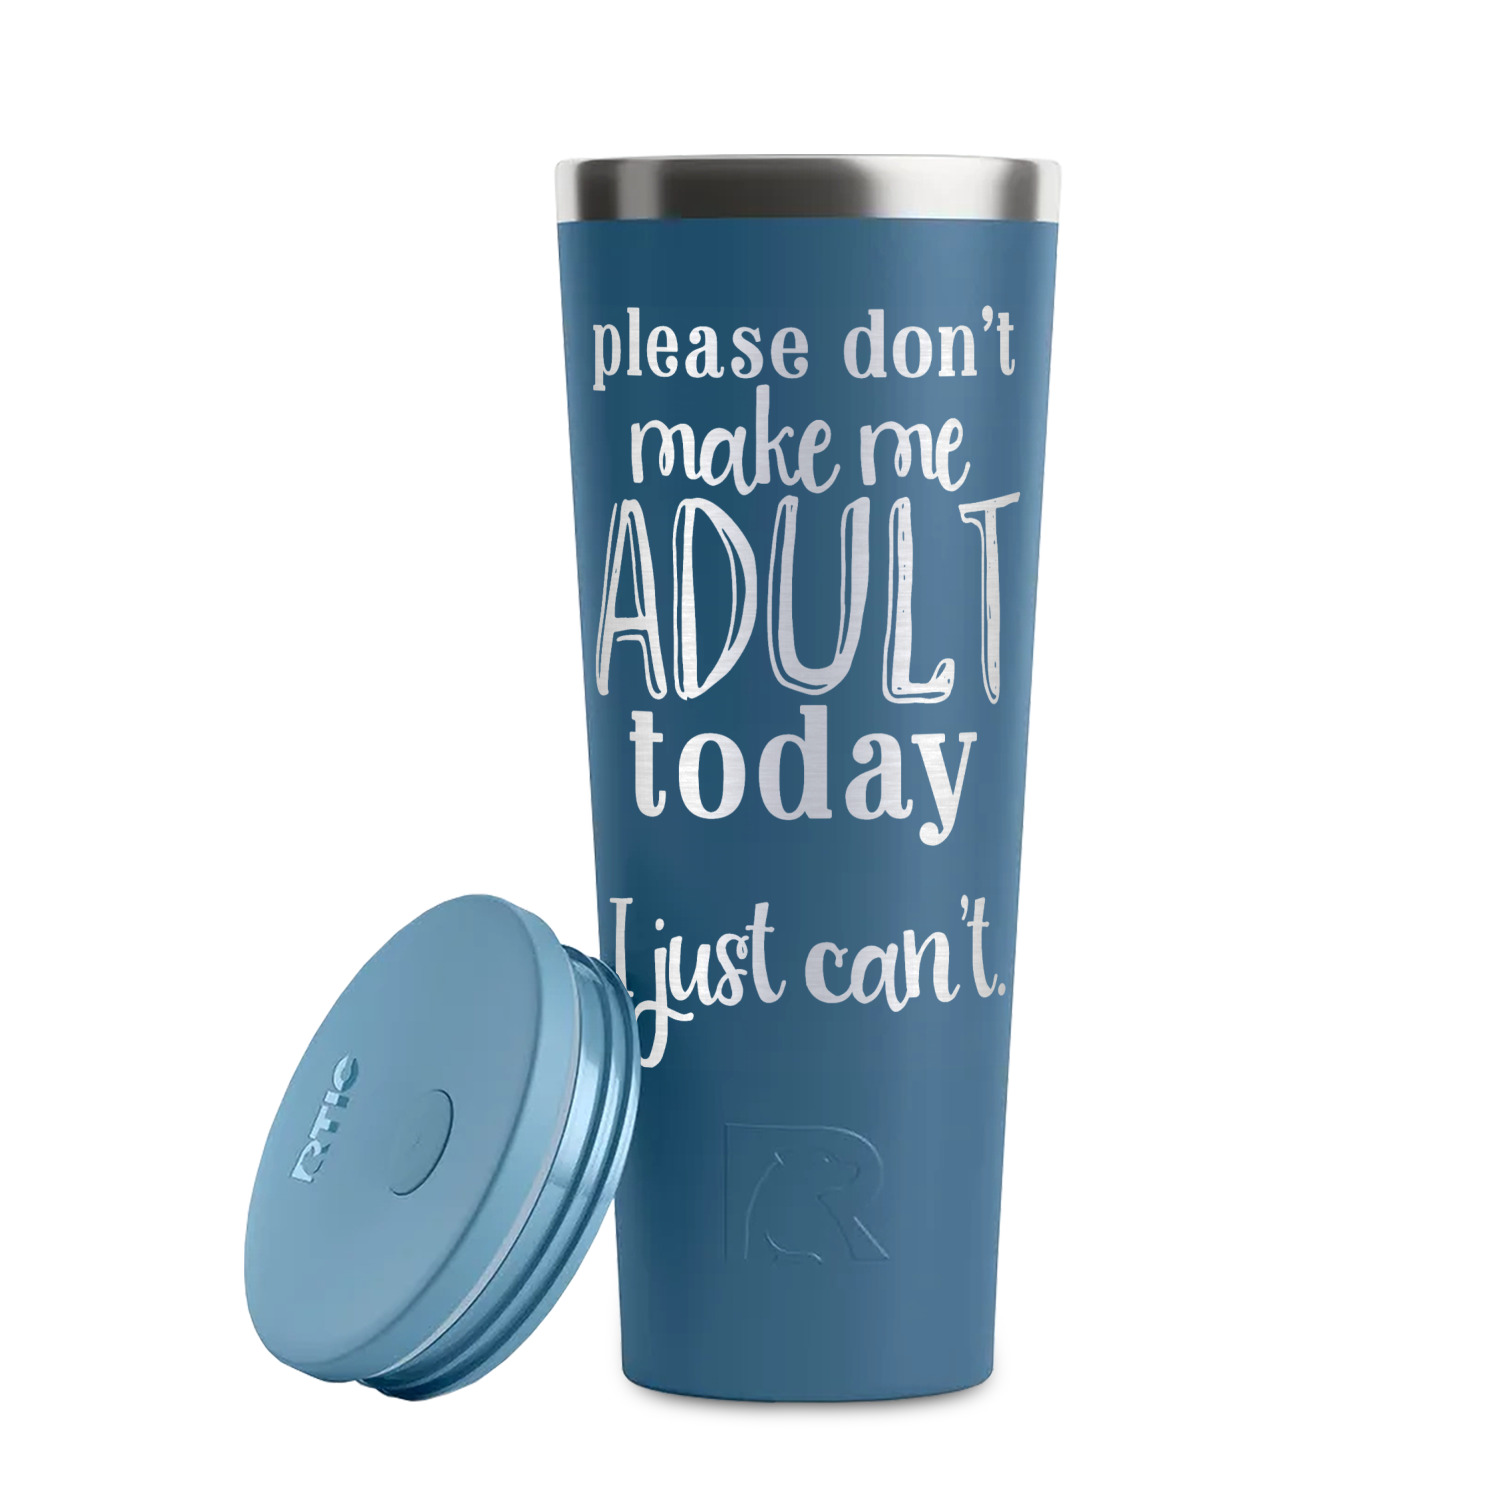 https://www.youcustomizeit.com/common/MAKE/1038321/Funny-Quotes-and-Sayings-Steel-Blue-RTIC-Everyday-Tumbler-28-oz-Lid-Off.jpg?lm=1698260680